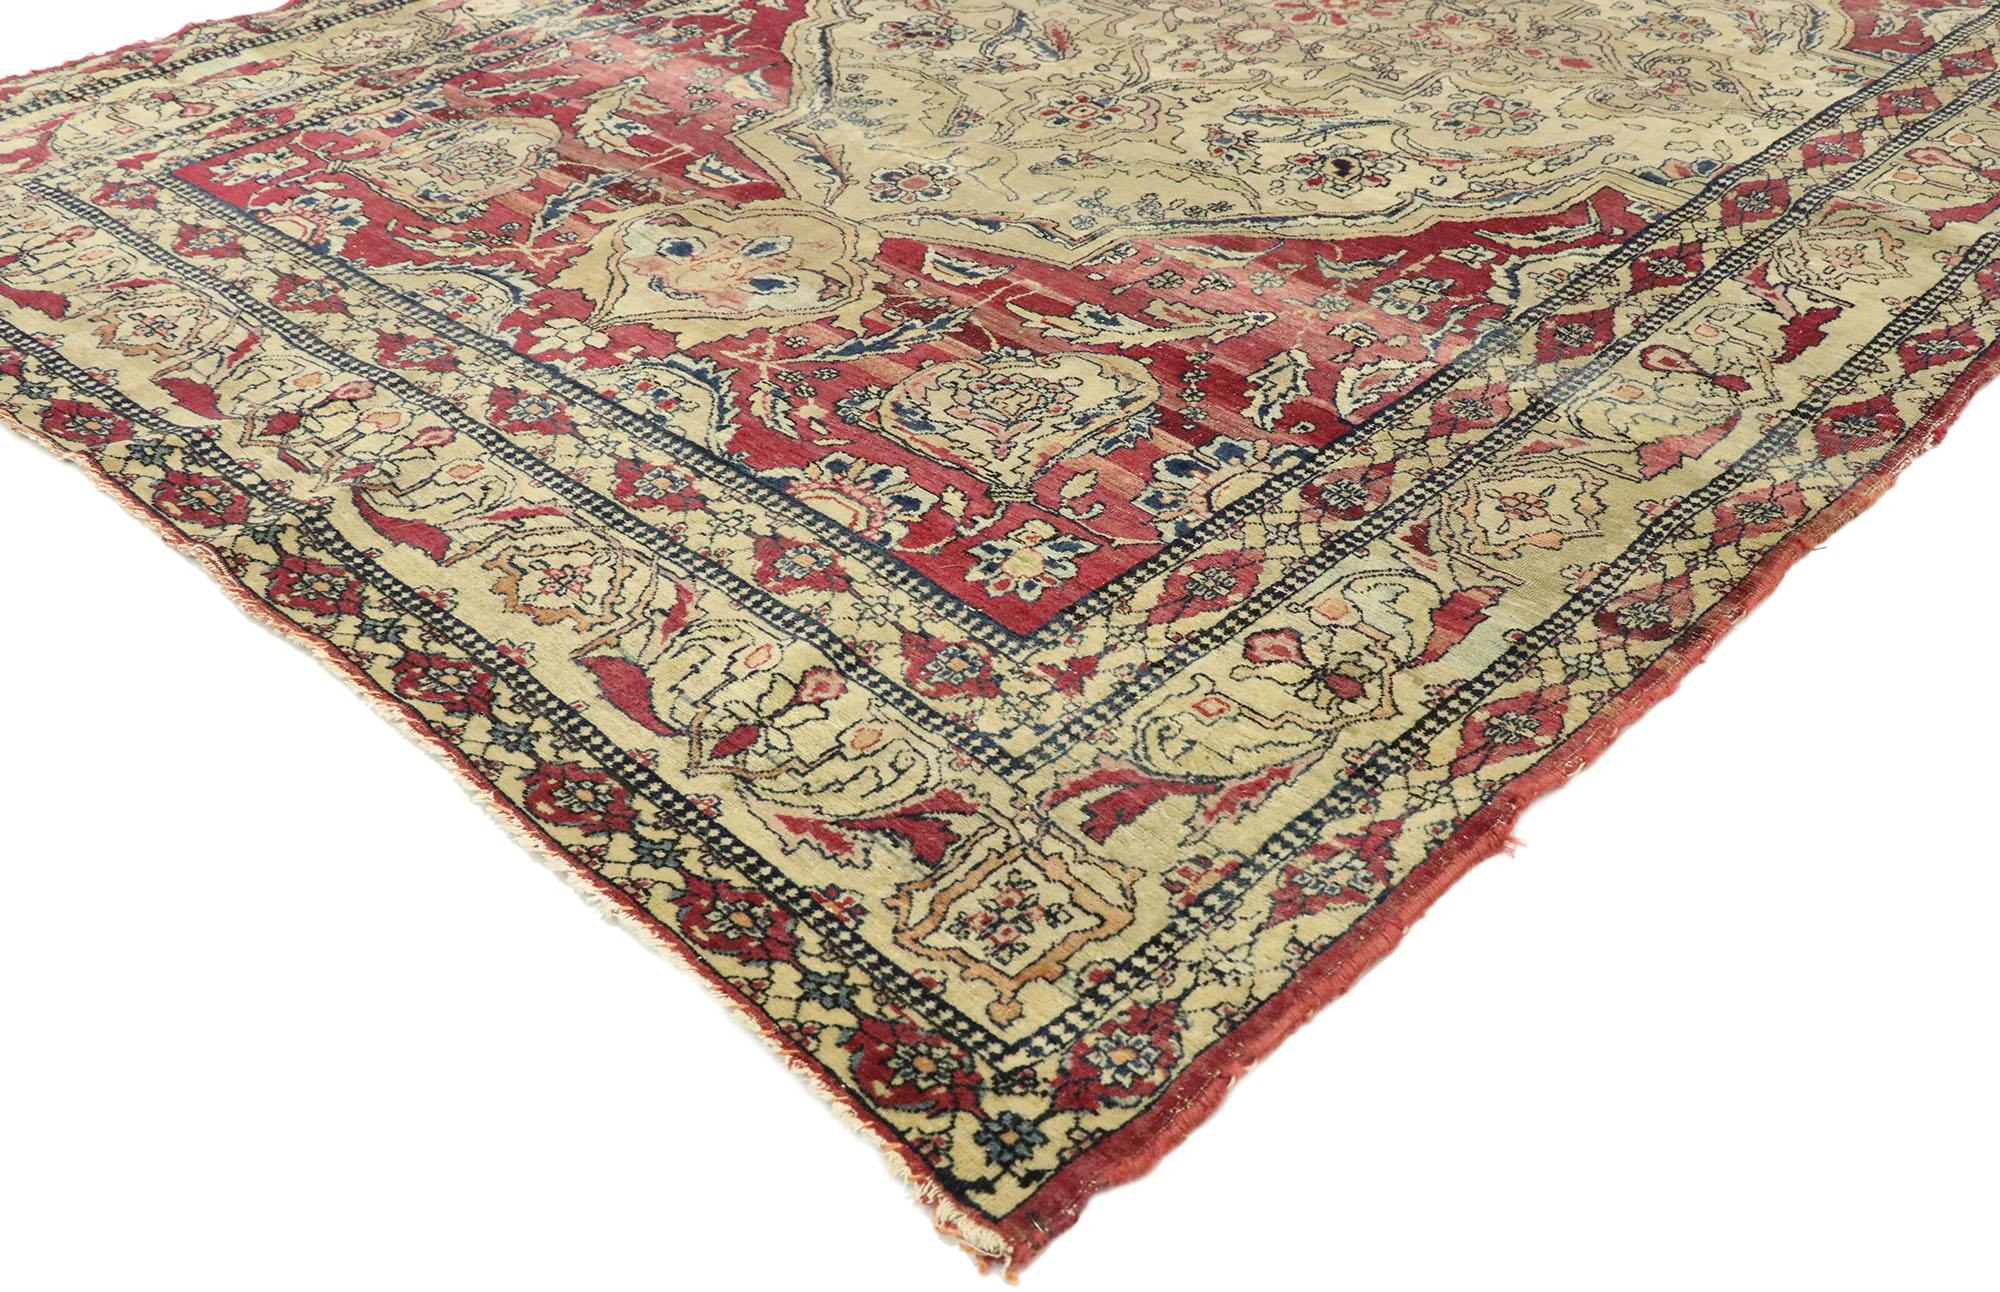 77515 distressed antique Persian Kerman rug with Modern Rustic English style. With its perfectly worn-in charm and rustic sensibility, this hand-knotted wool distressed antique Persian Kerman rug will take on a curated lived-in look that feels